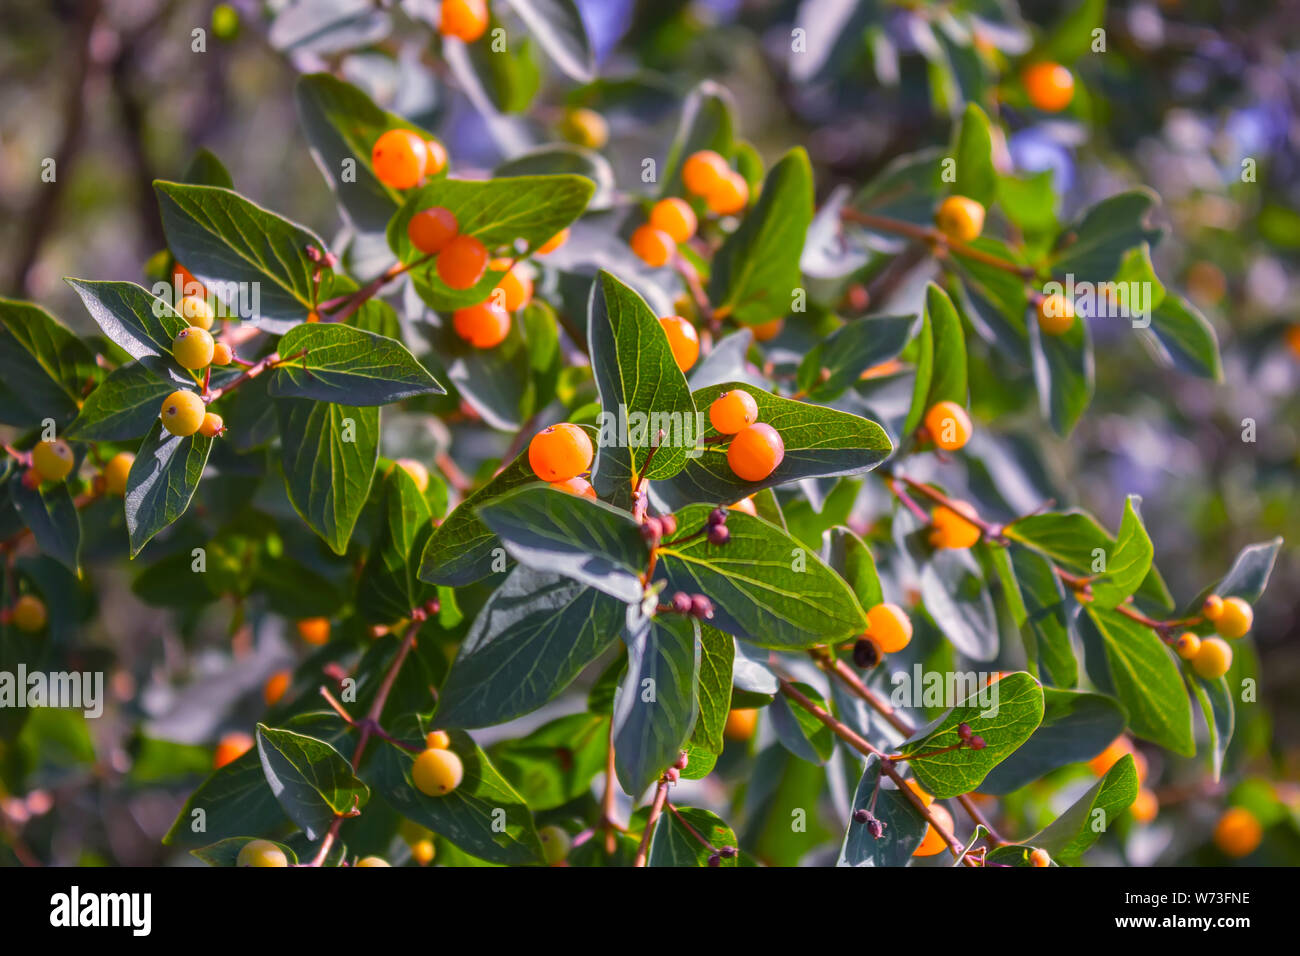 Branches of Frangula alnus with red berries. Stock Photo